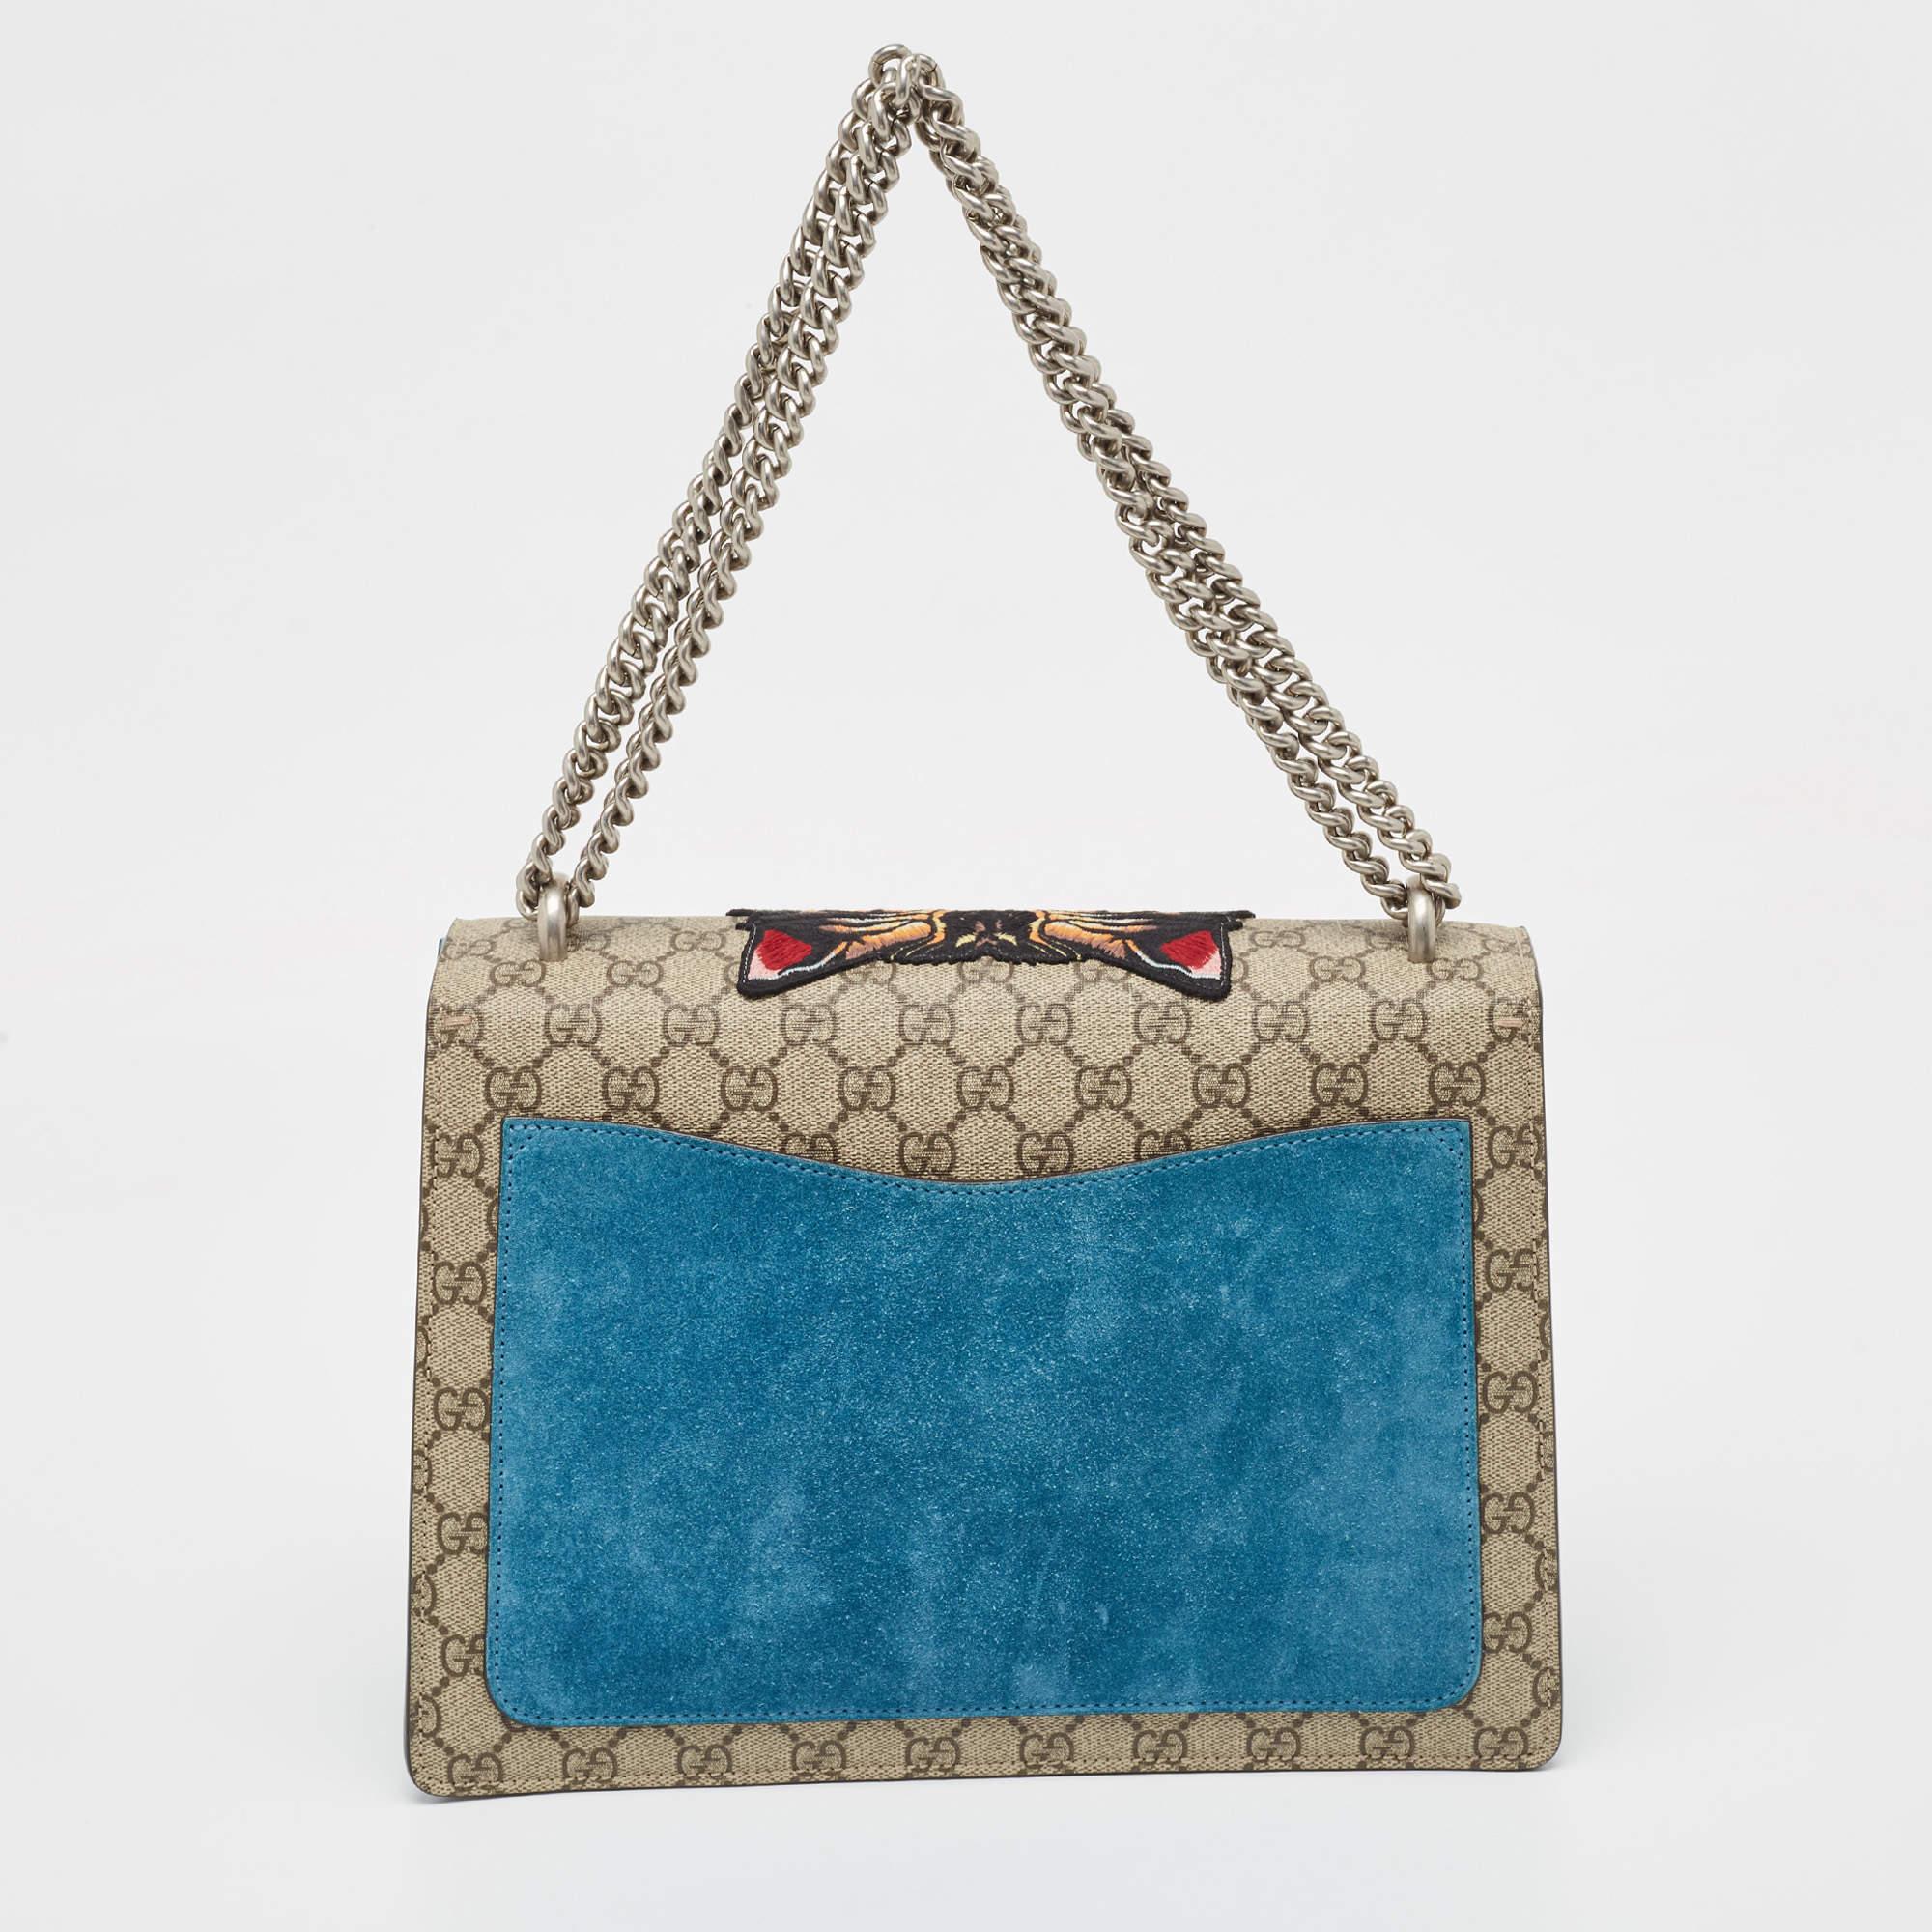 Gucci's Dionysus collection is inspired by the Greek God Dionysus, who is believed to have crossed the Tigris river on a tiger sent to him by Zeus. This creation has been beautifully made from GG Supreme canvas and beautifully merges the tradition